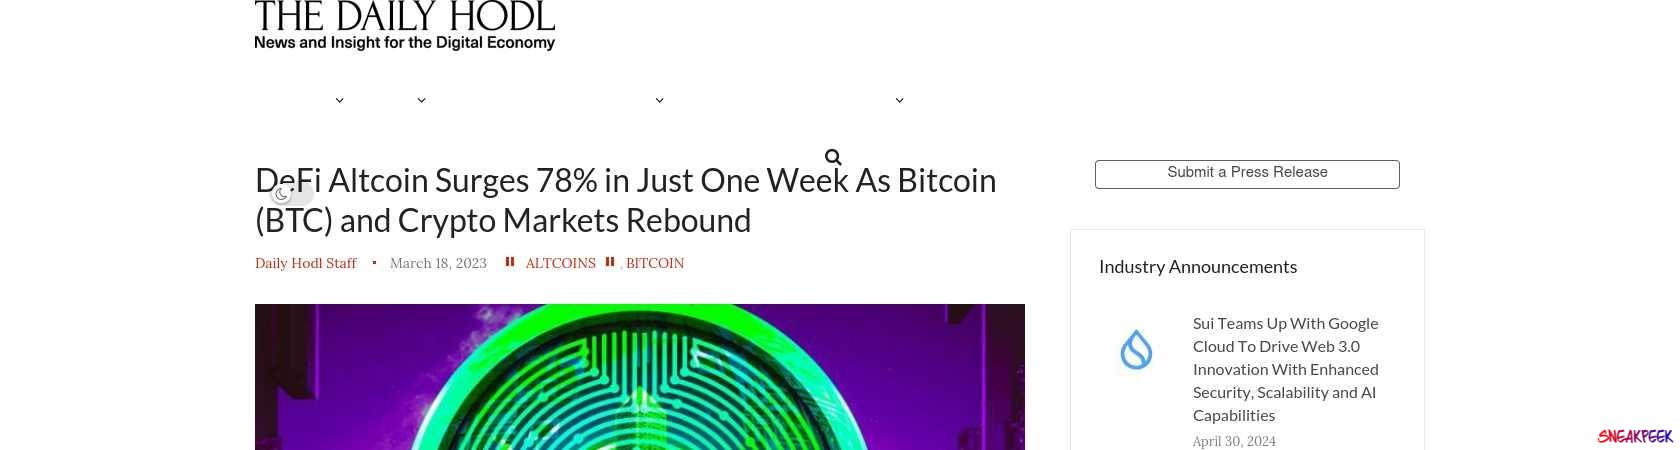 Read the full Article:  ⭲ DeFi Altcoin Surges 78% in Just One Week As Bitcoin (BTC) and Crypto Markets Rebound